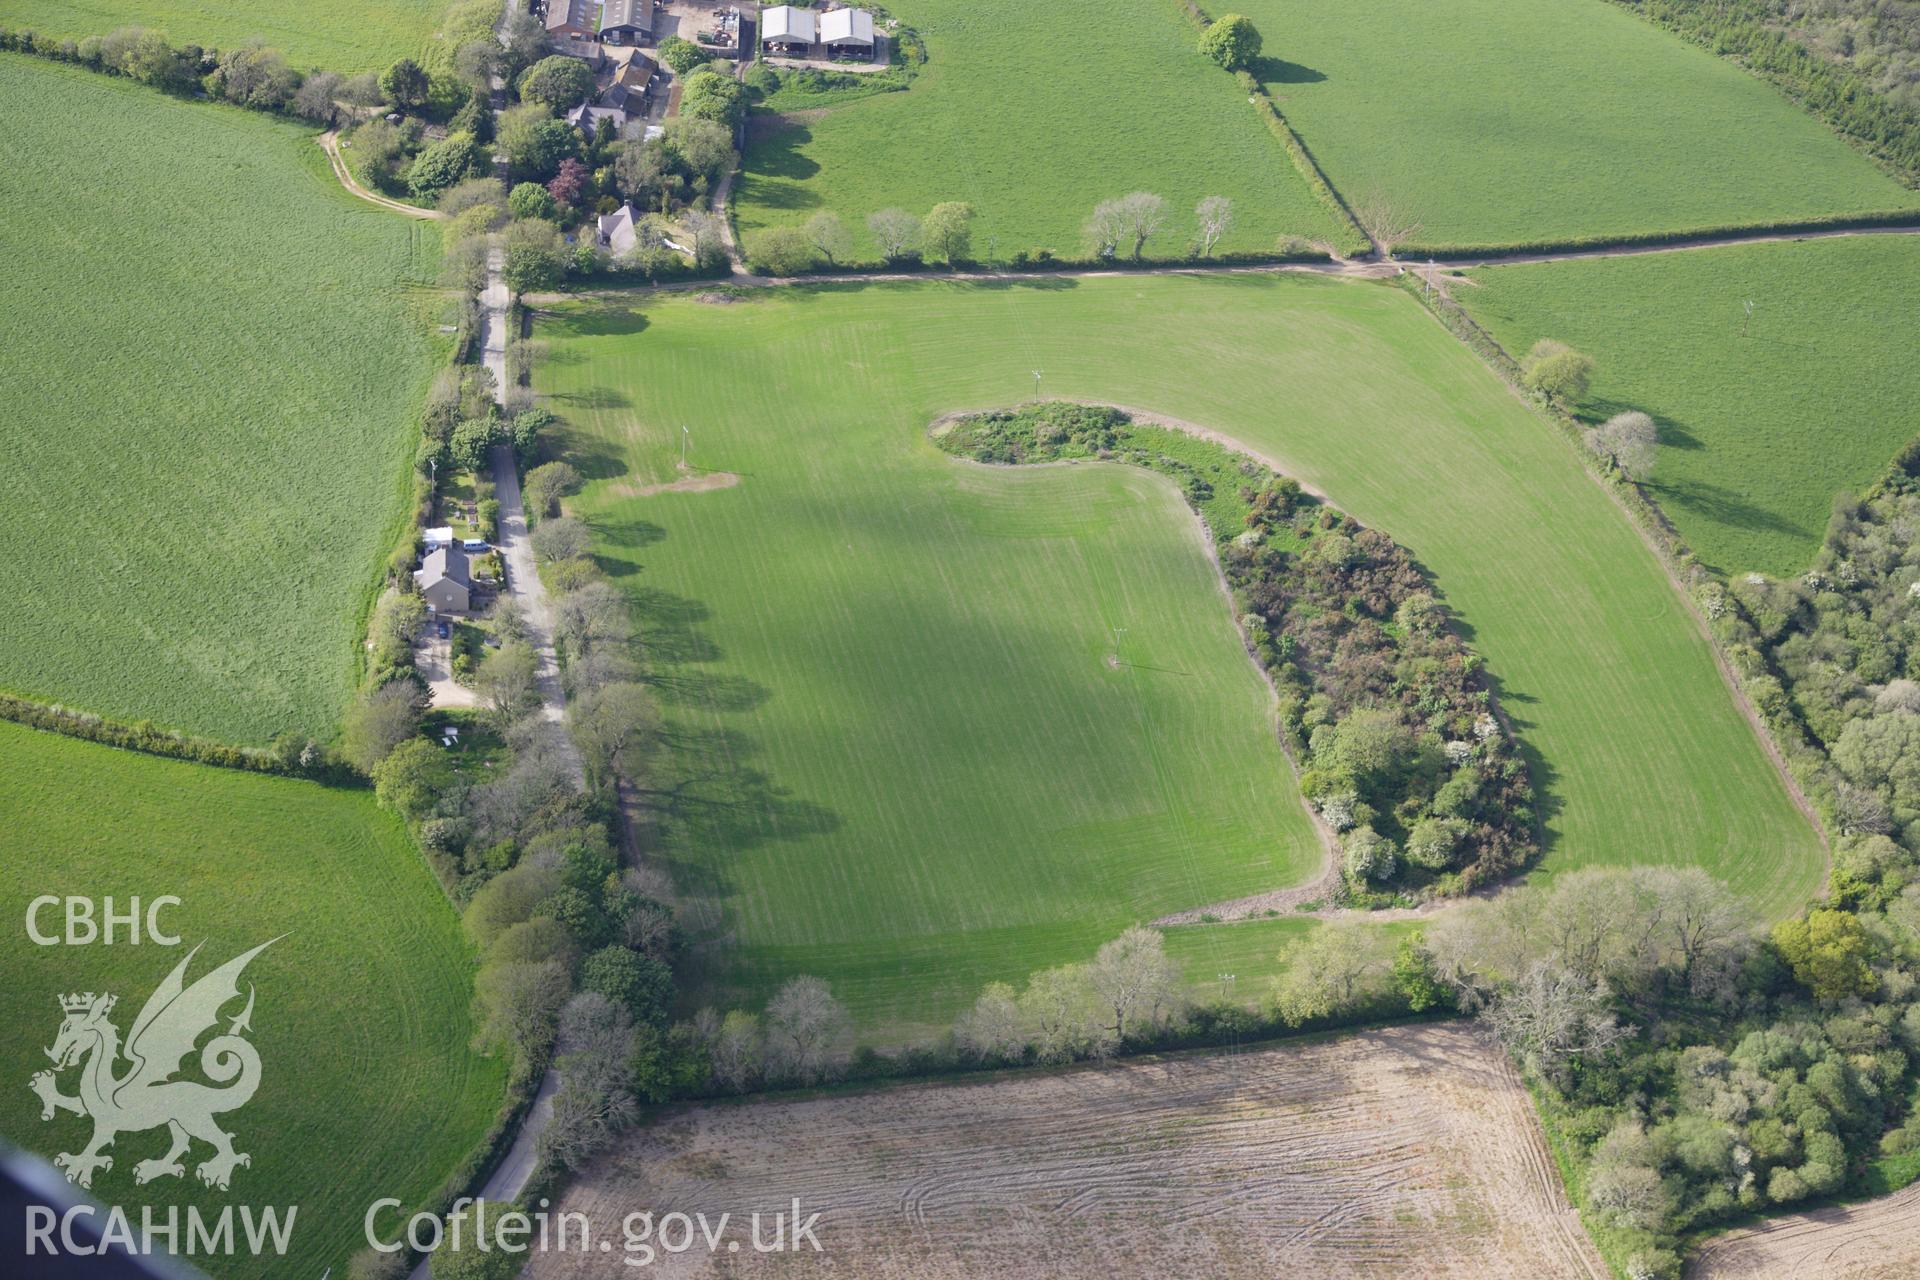 RCAHMW colour oblique photograph of Wiston Roman fort. Taken by Toby Driver on 22/05/2012.